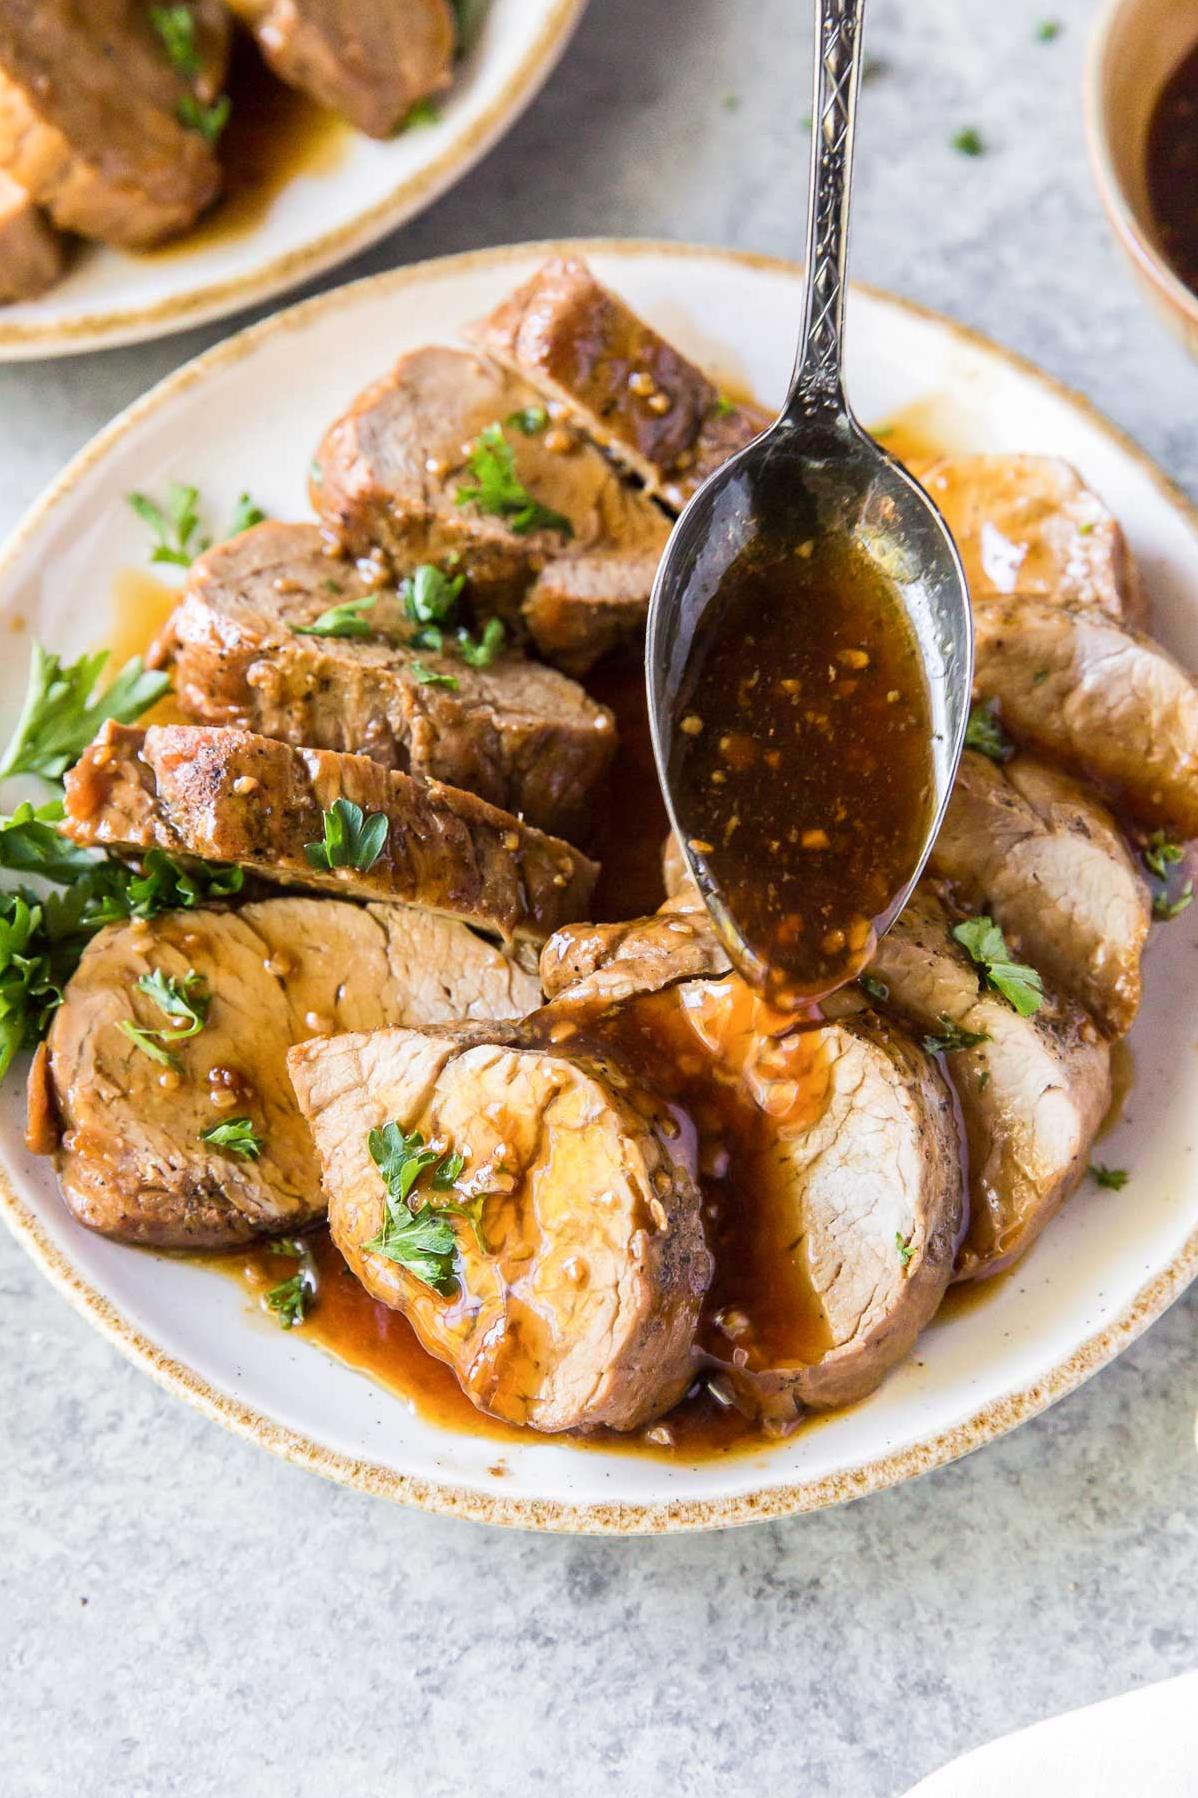  The ultimate weeknight meal: this Garlic Pork Tenderloin is quick, easy, and delicious.